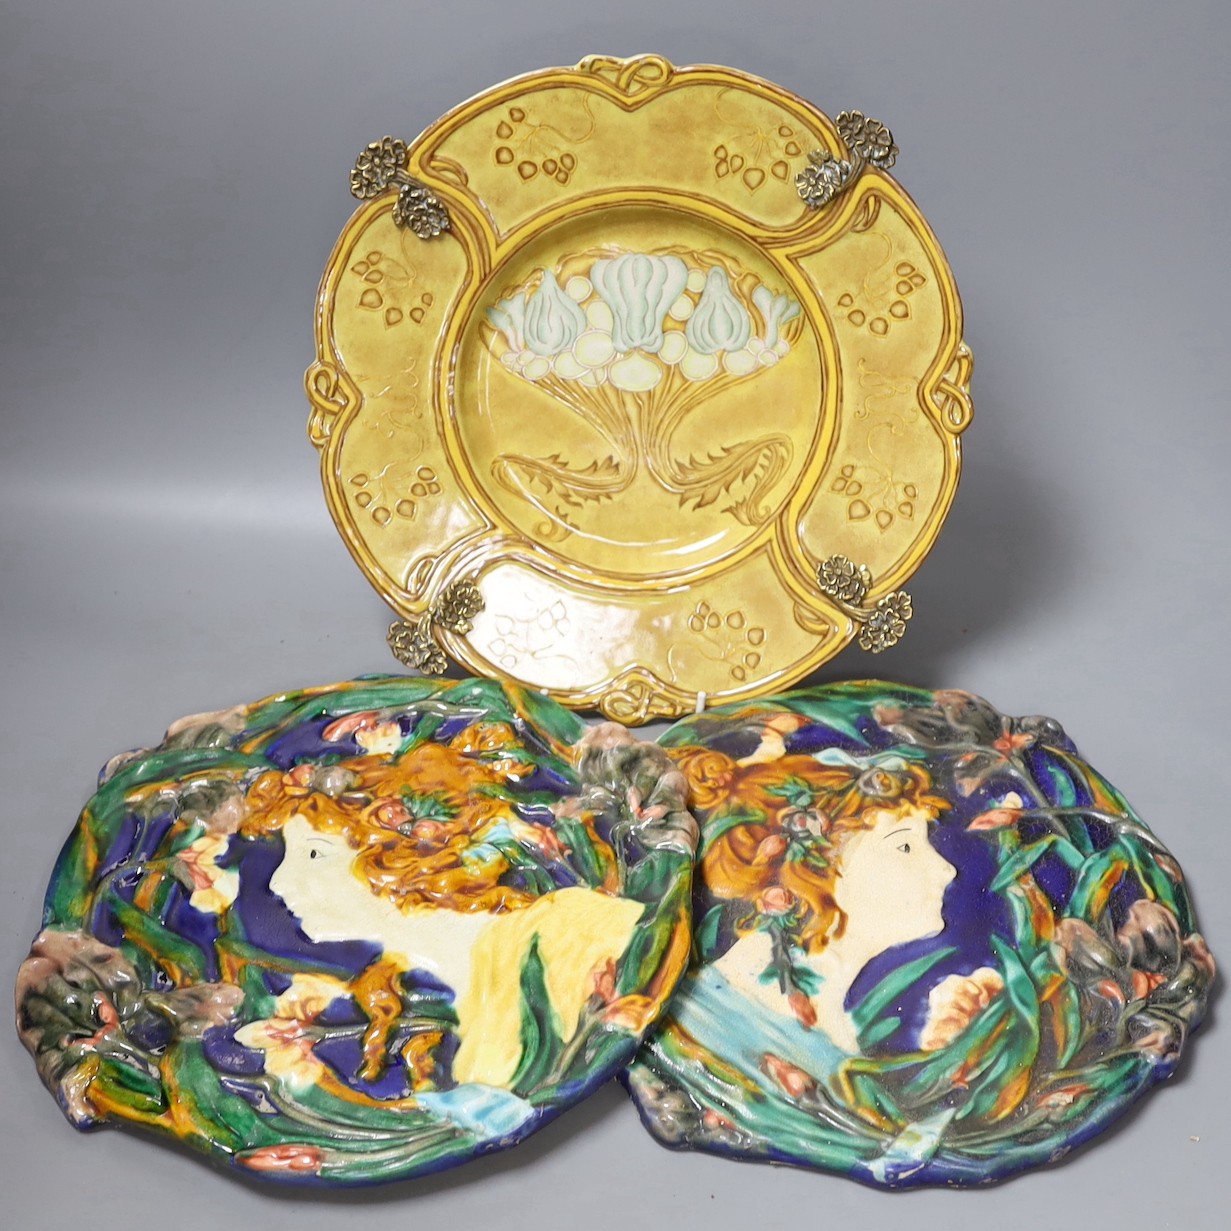 Two Continental Art Nouveau style plaques and a brass mounted dish, dish 31.5 cms diameter.